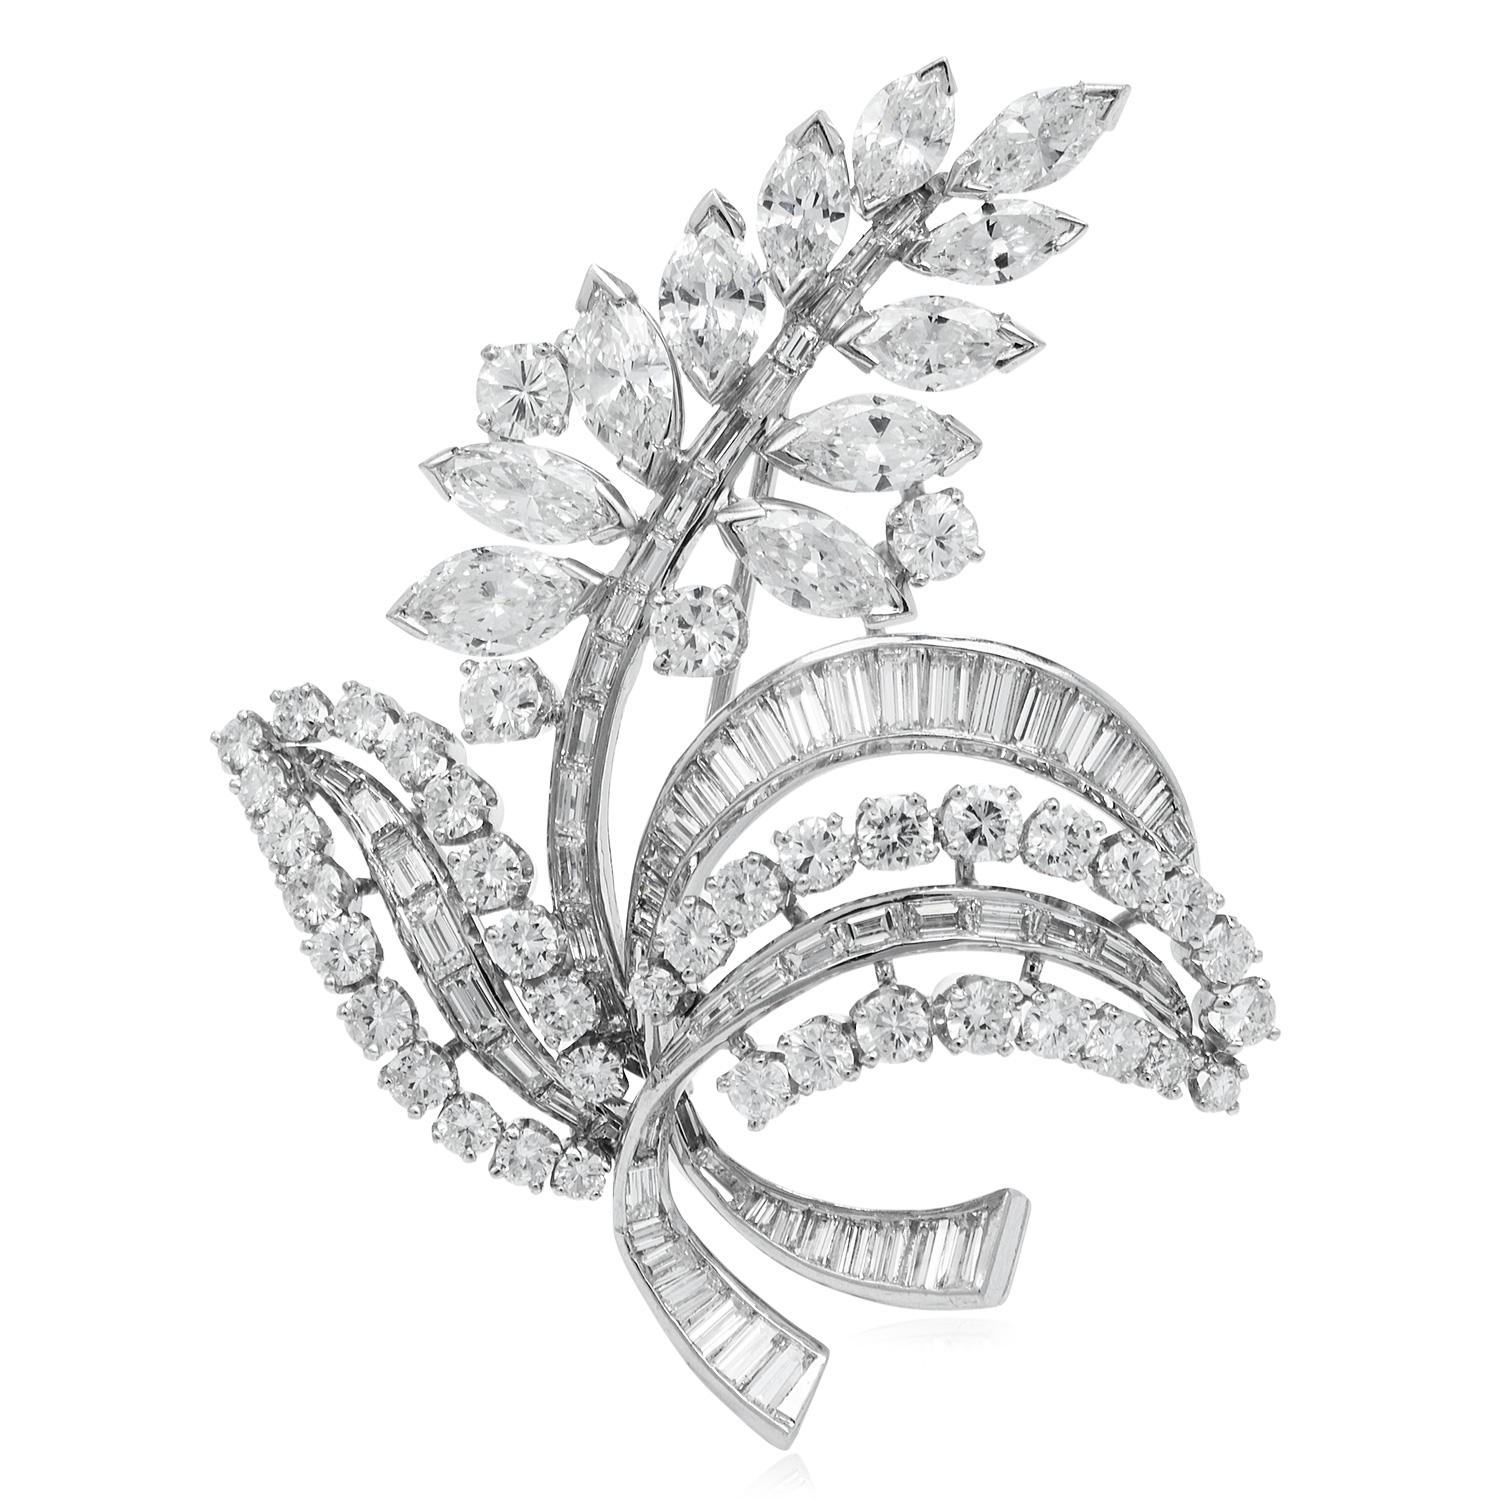 Estate Diamond Platinum Elegant Lavender Flower Inspired Pin Brooch & pendant, with a bale.

Dazzle yourself with the sparkle on this exquisite piece with Icy White Diamonds.

Exquisitely crafted in solid platinum, the elongated pattern is created